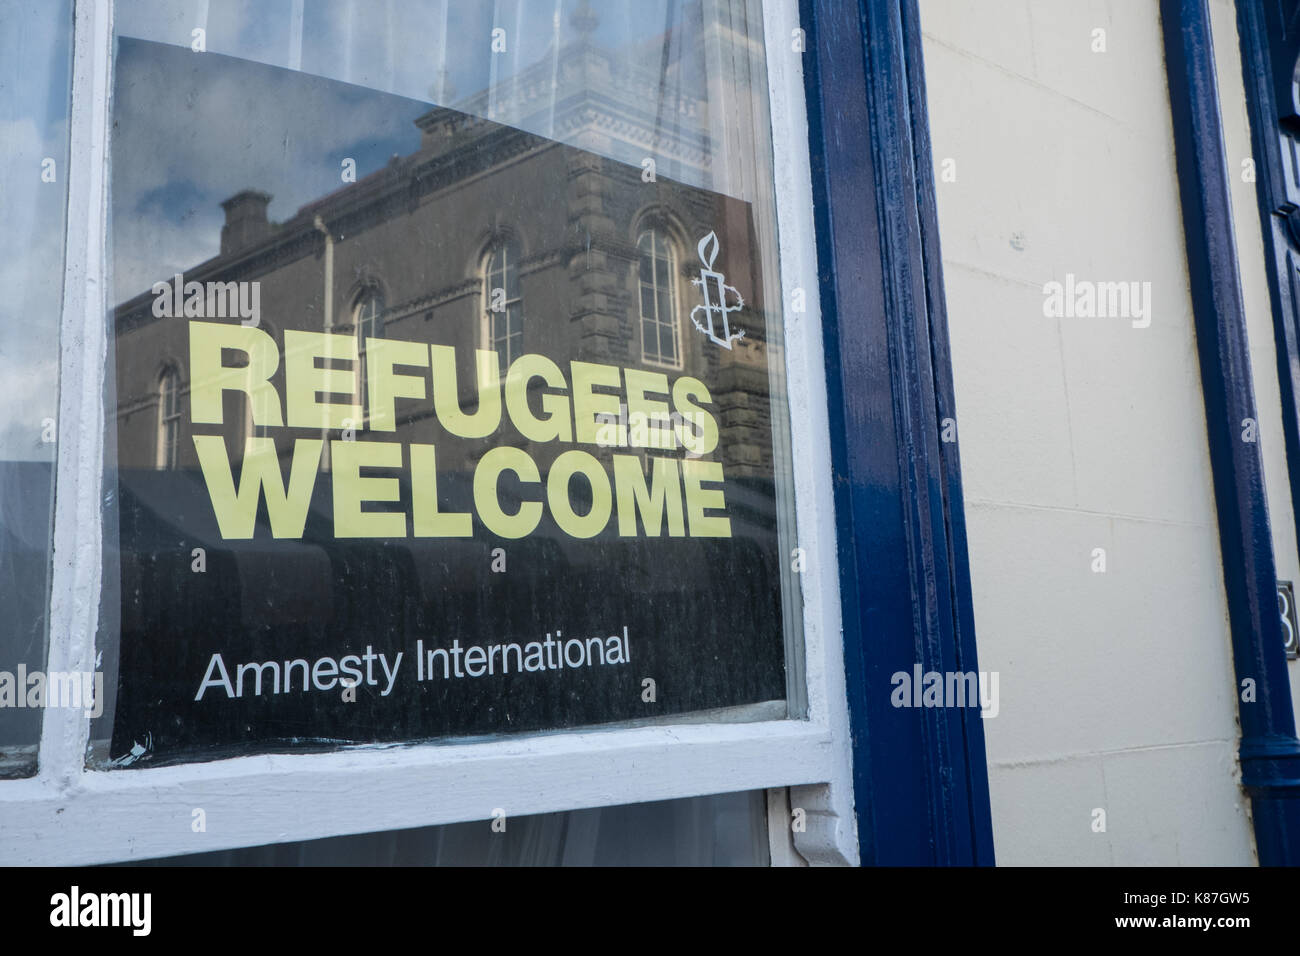 Refugees,welcome,poster,published,by,Amnesty International,displayed,in,window,of,house,in,centre,of,Aberystwyth,Mid,West,Wales,Welsh,immigration,UK, Stock Photo